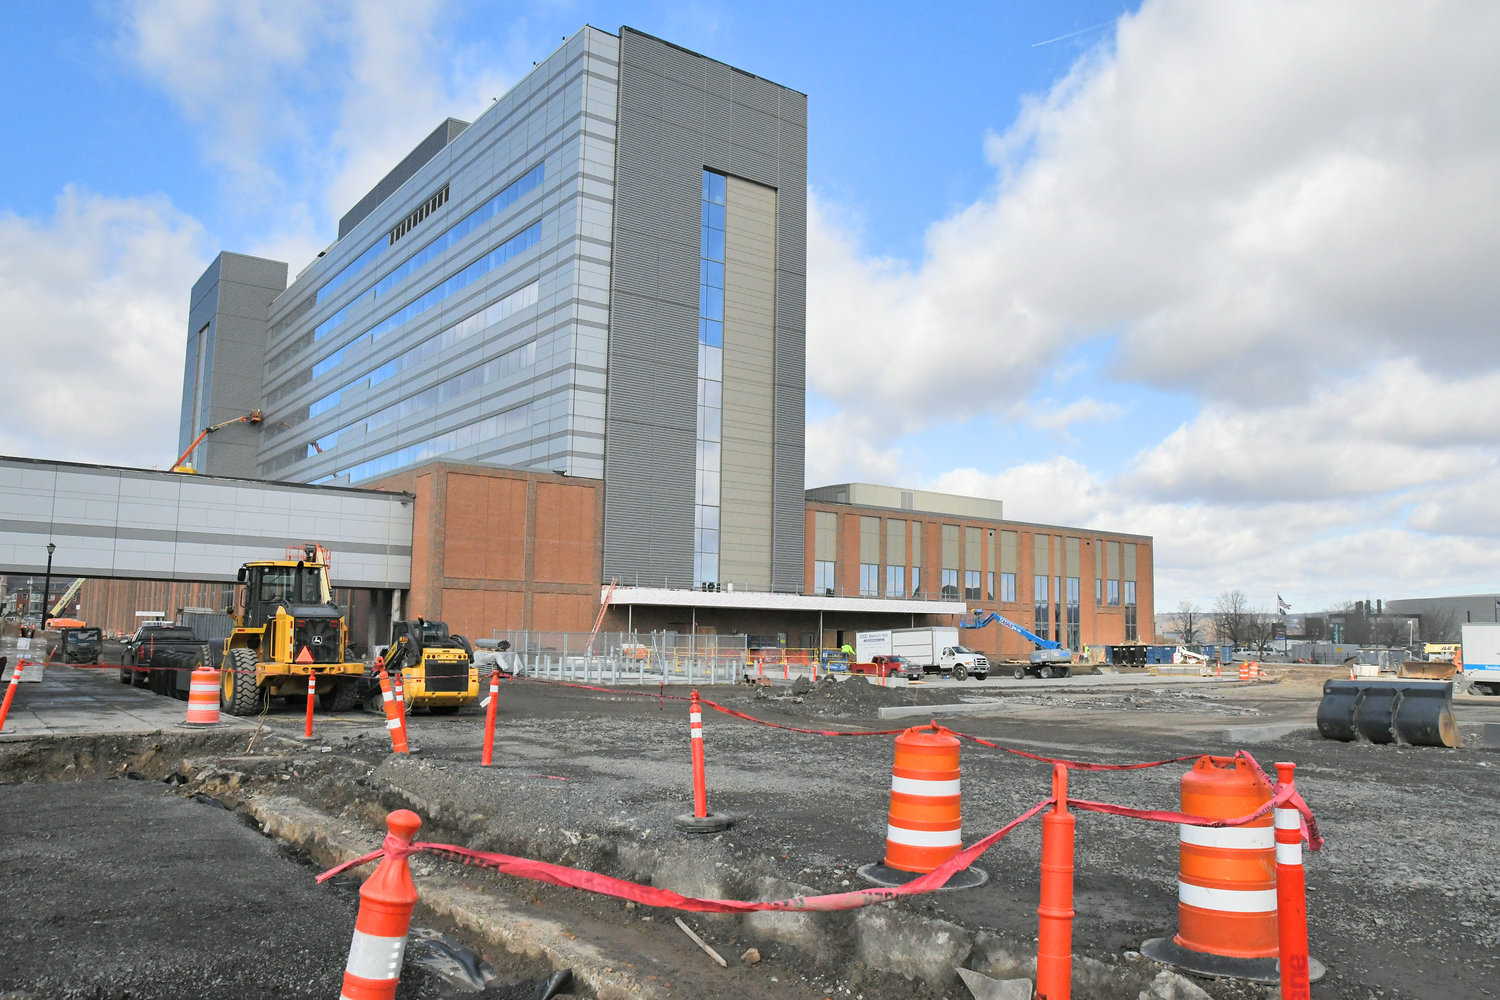 Construction continues on the Wynn Hospital, which expects to open in October.